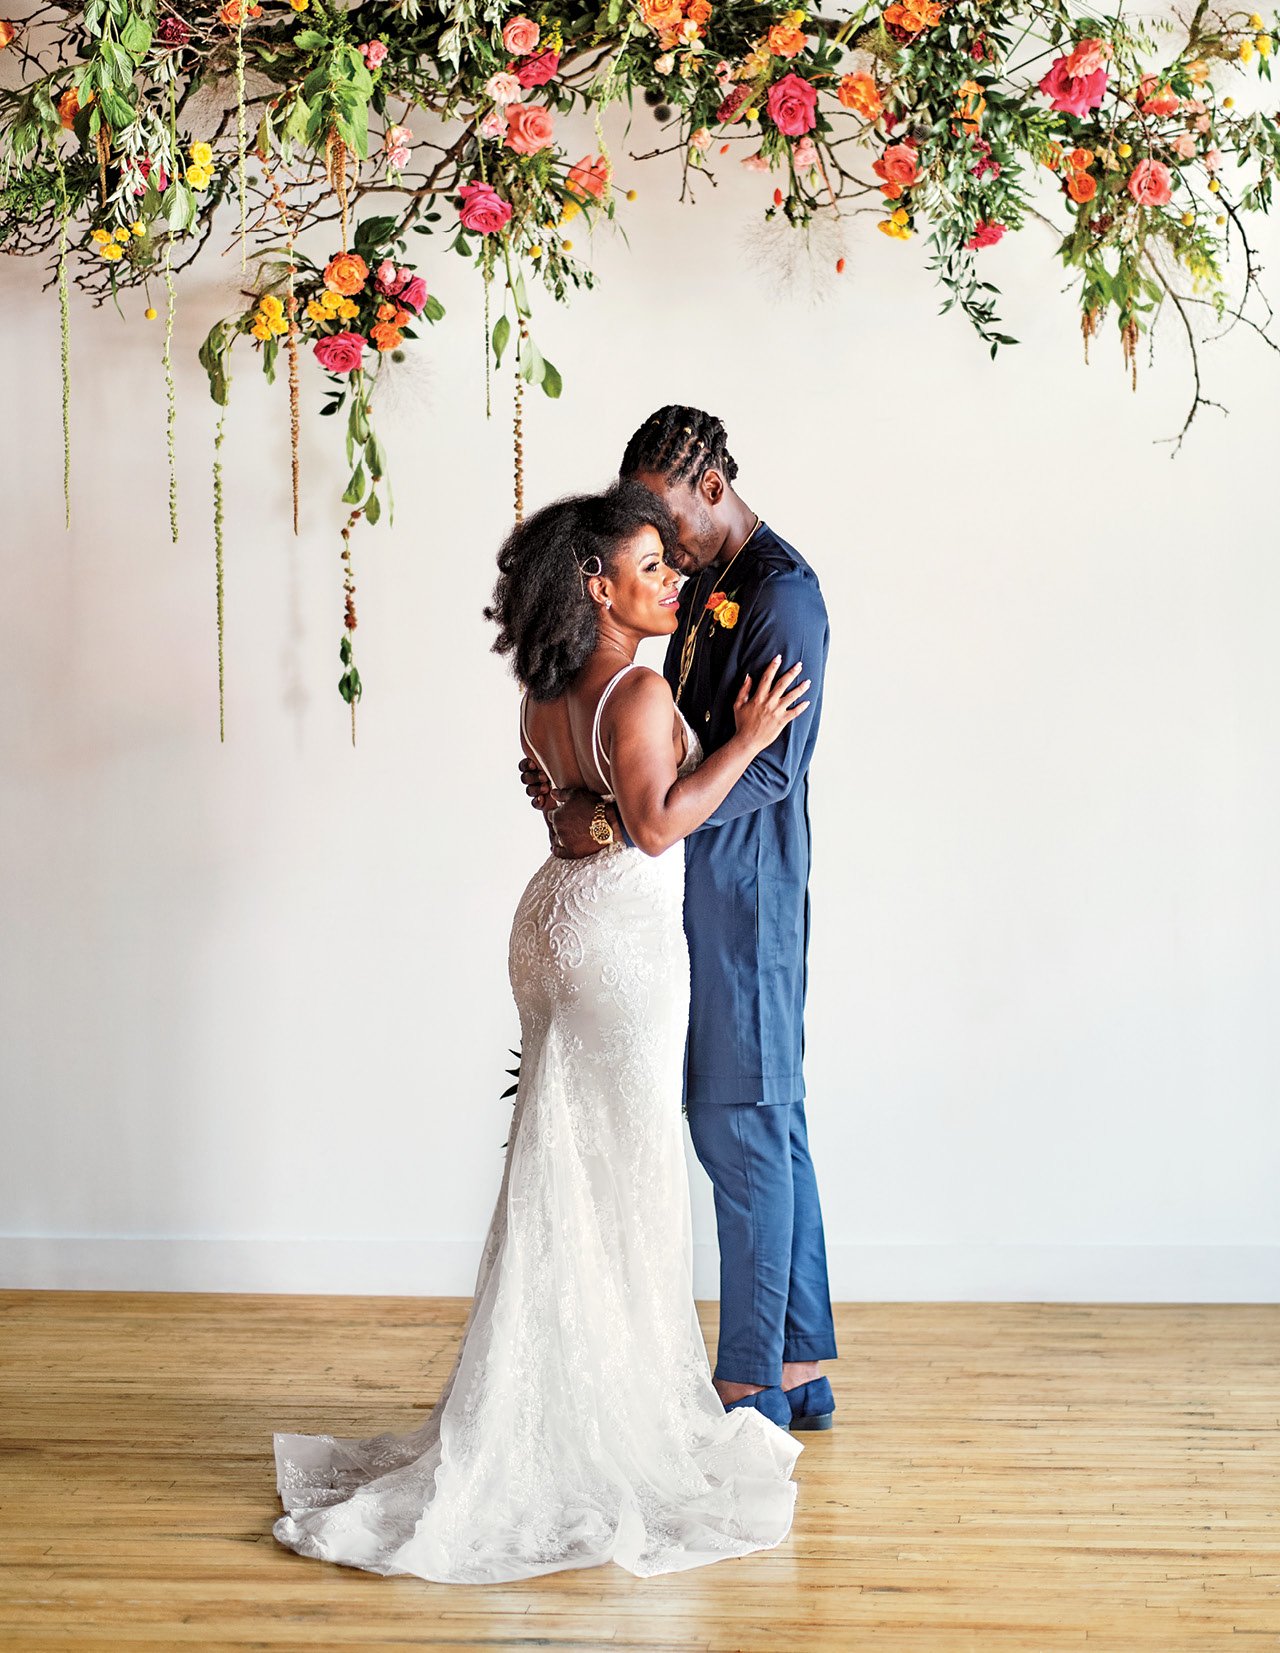 A newlywed Black couple embrace under a floral installation